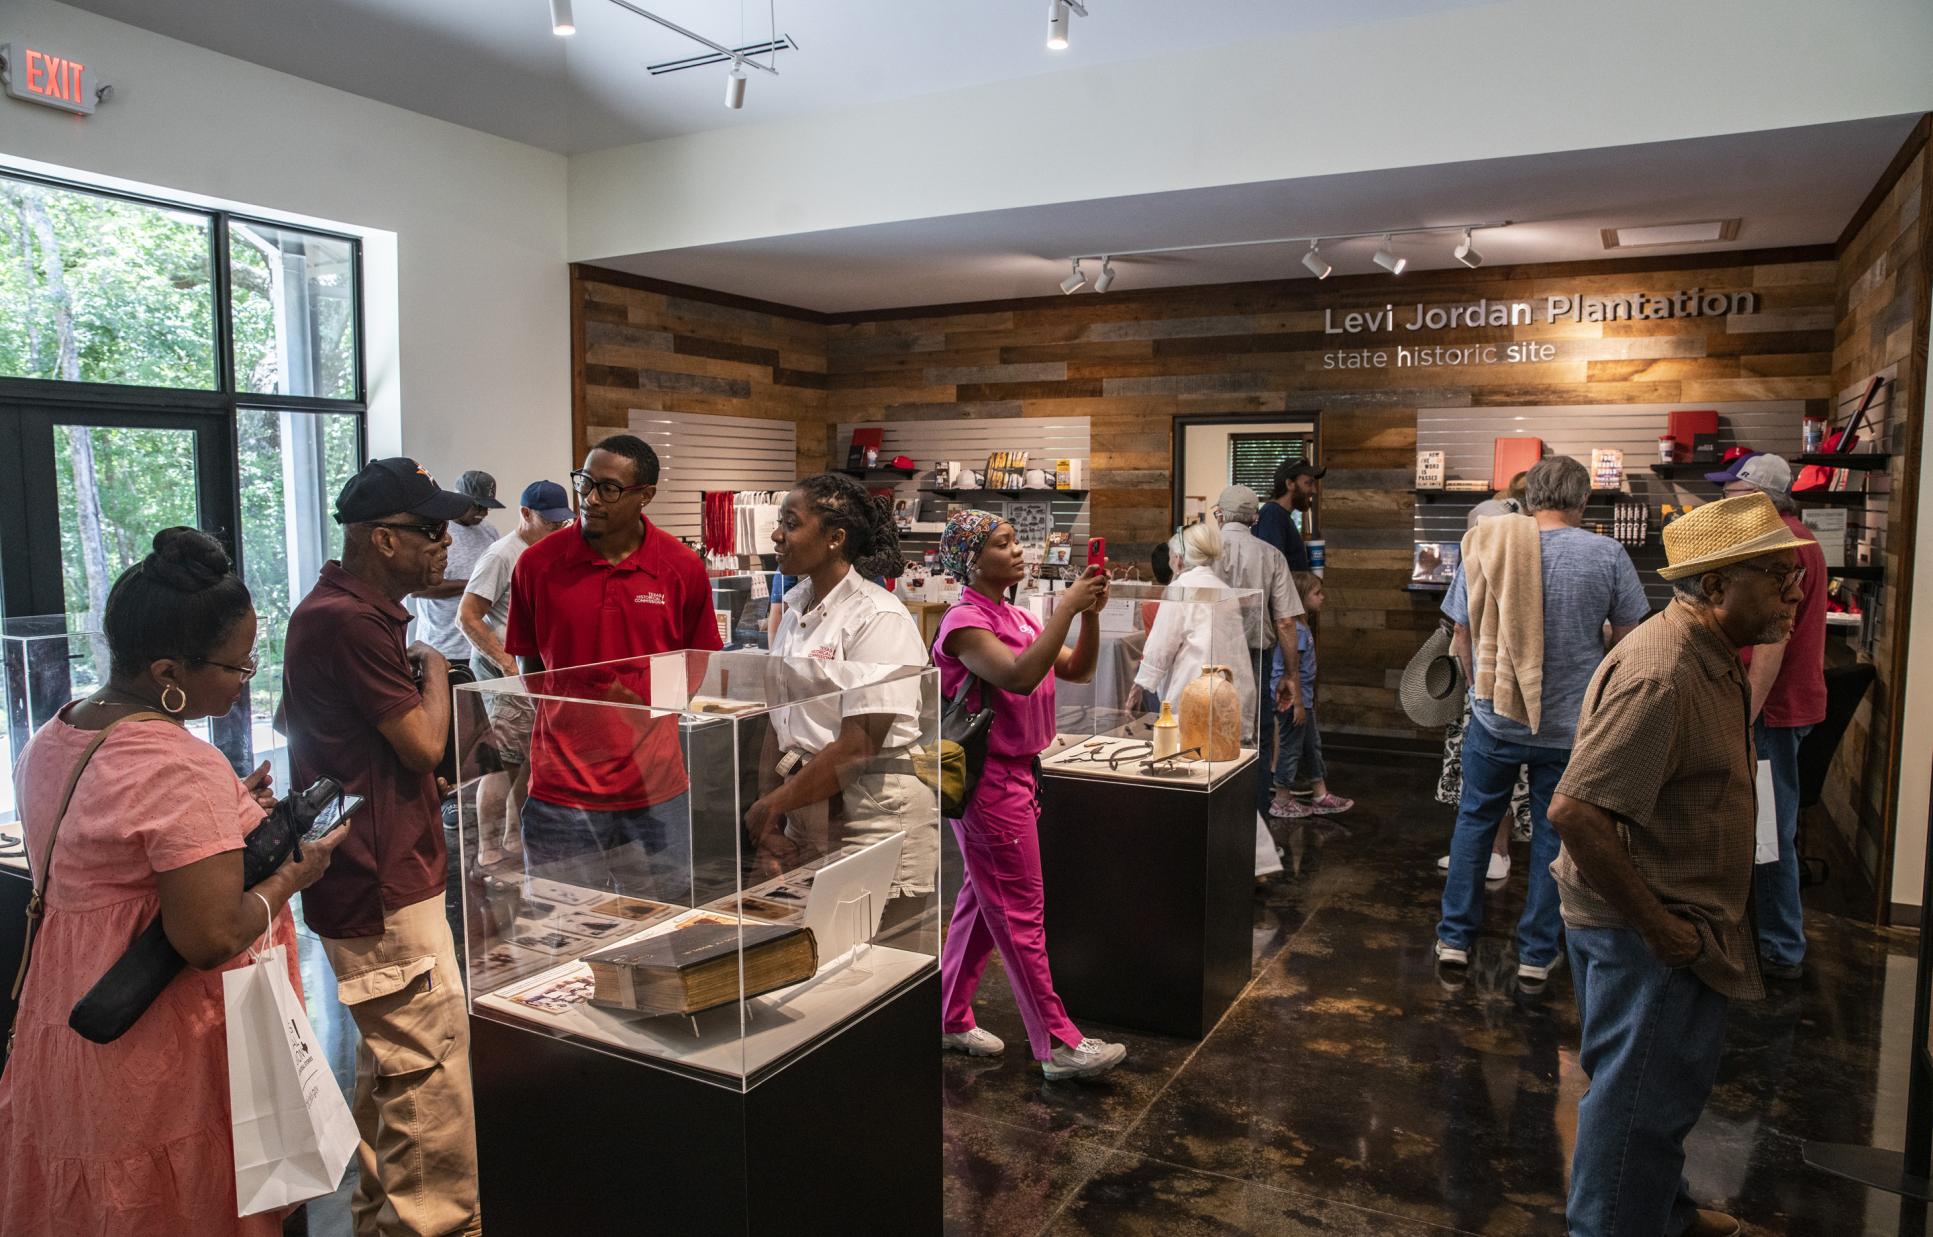 Visitors in the exhibit gallery and gift shop at Levi Jordan